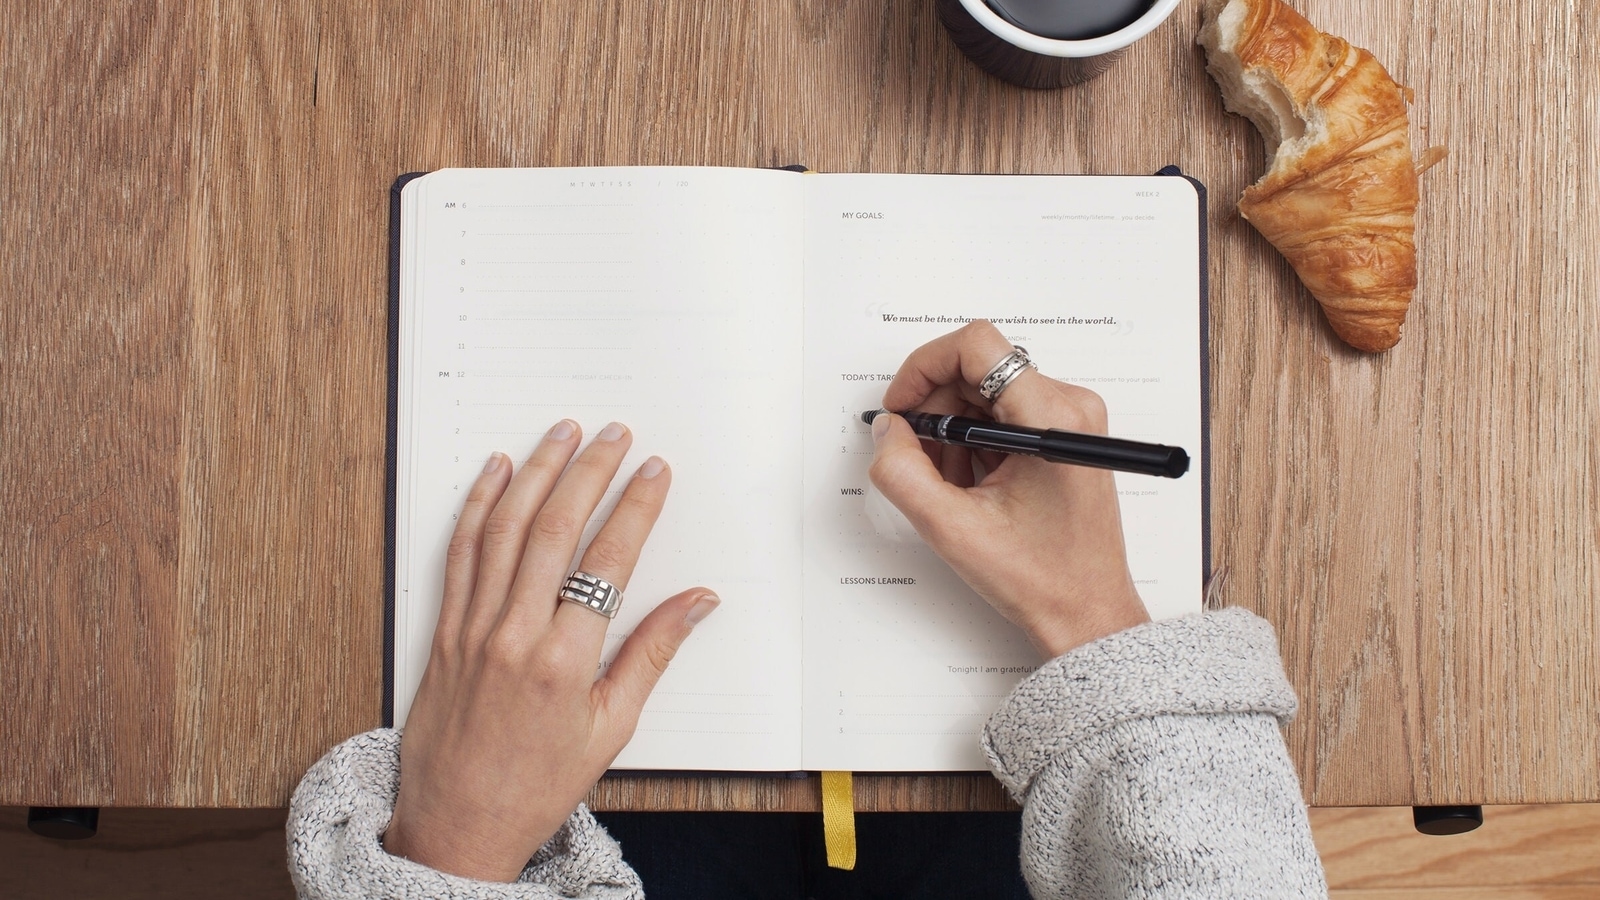 Benefits Of Journaling: How Keeping A Diary Improves Your Mental Health